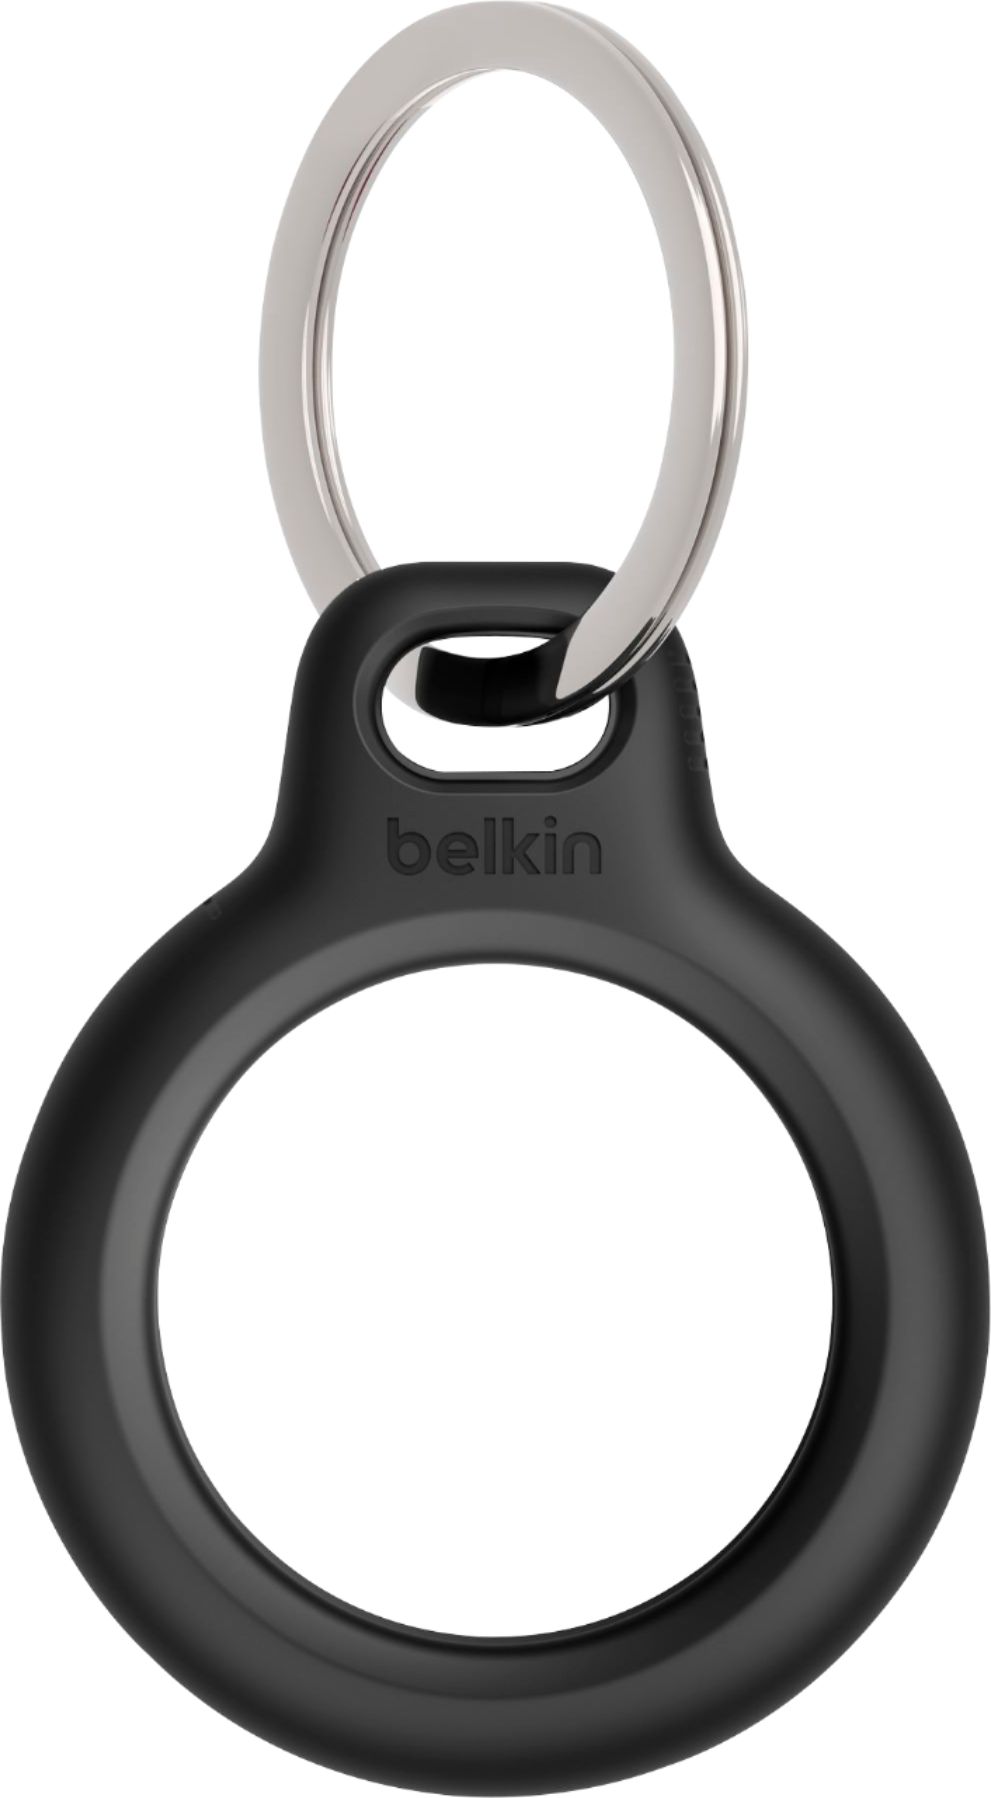 Belkin Secure Holder with Key Ring for Apple Airtag Black